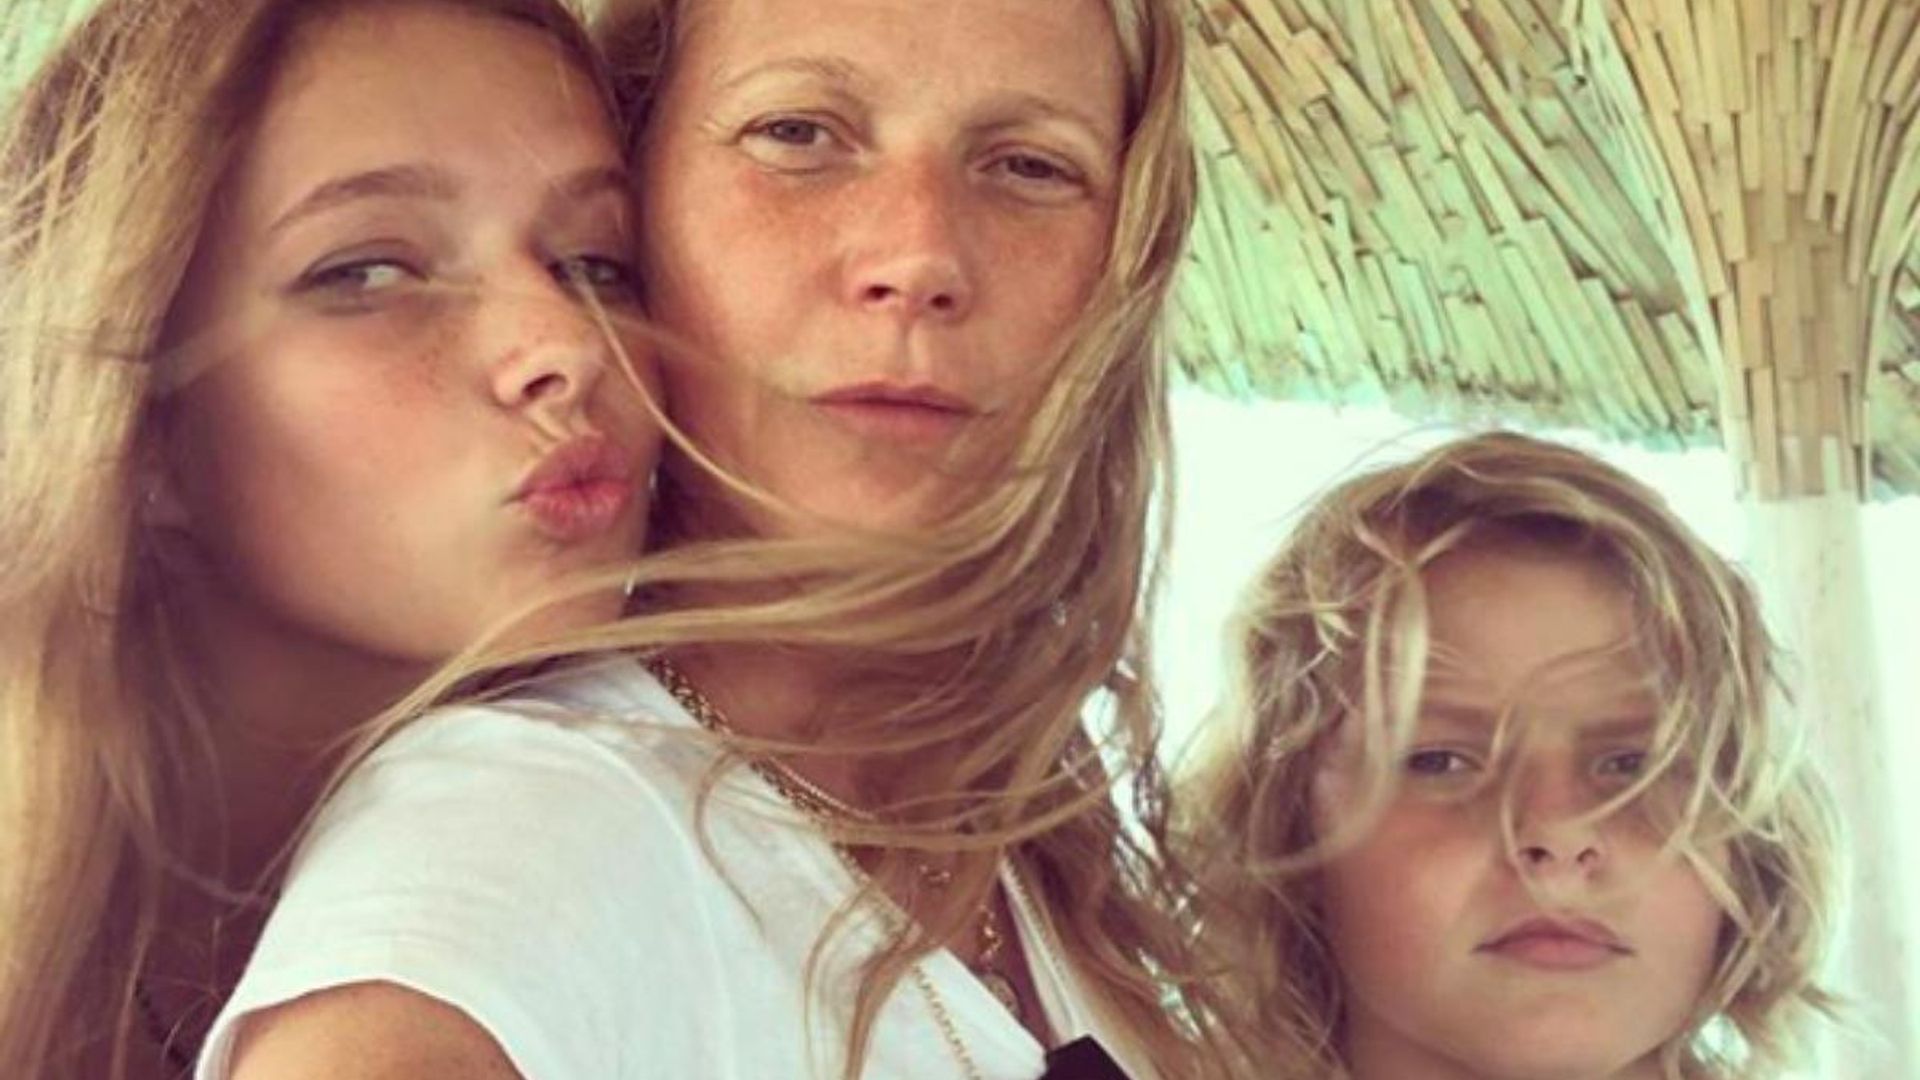 Gwyneth Paltrow gives insight into relationship with daughter Apple